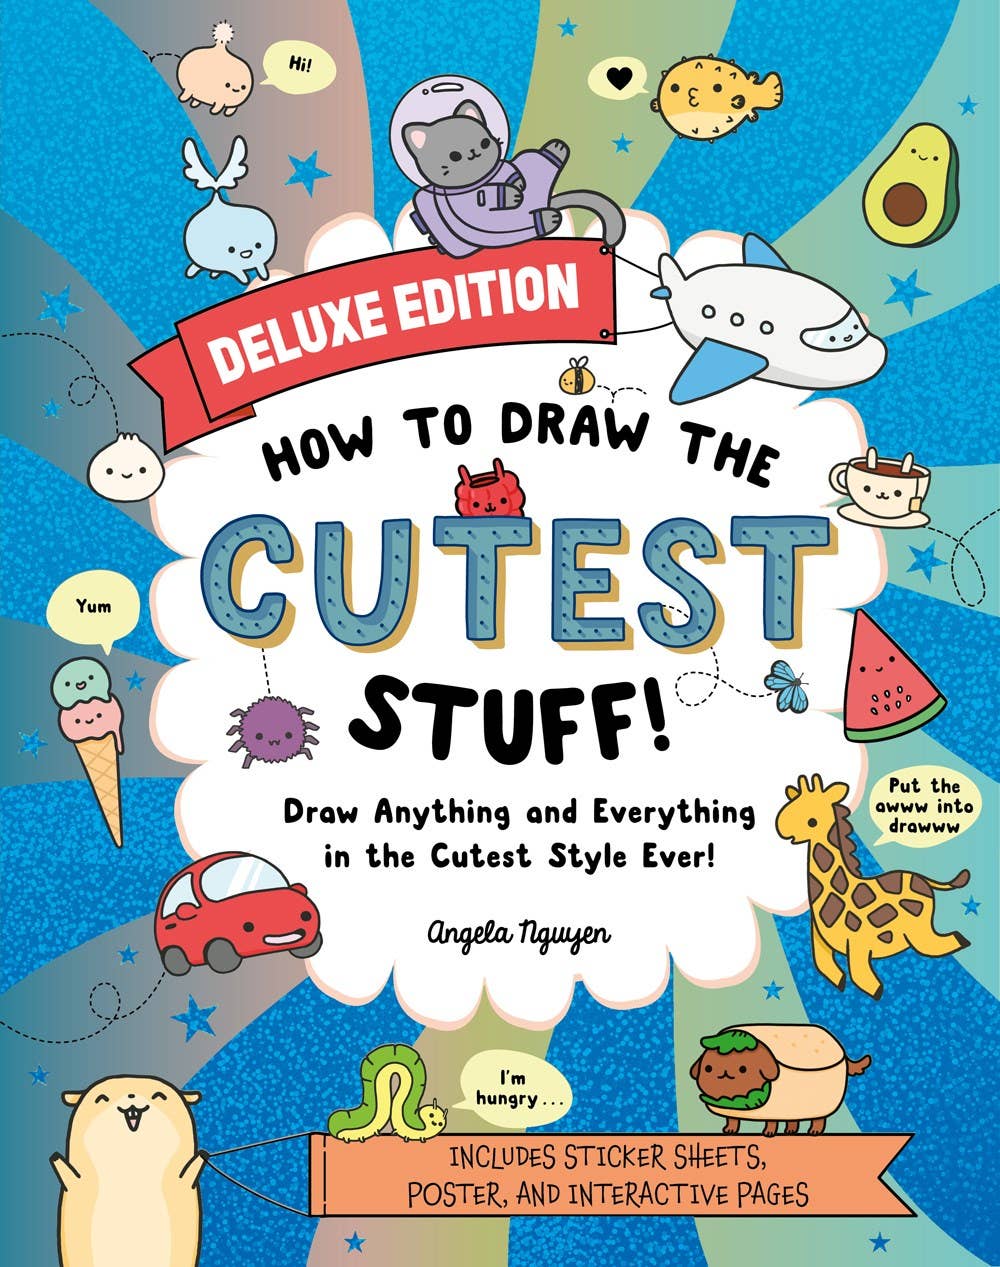 How to Draw the Cutest Stuff—Deluxe Edition!